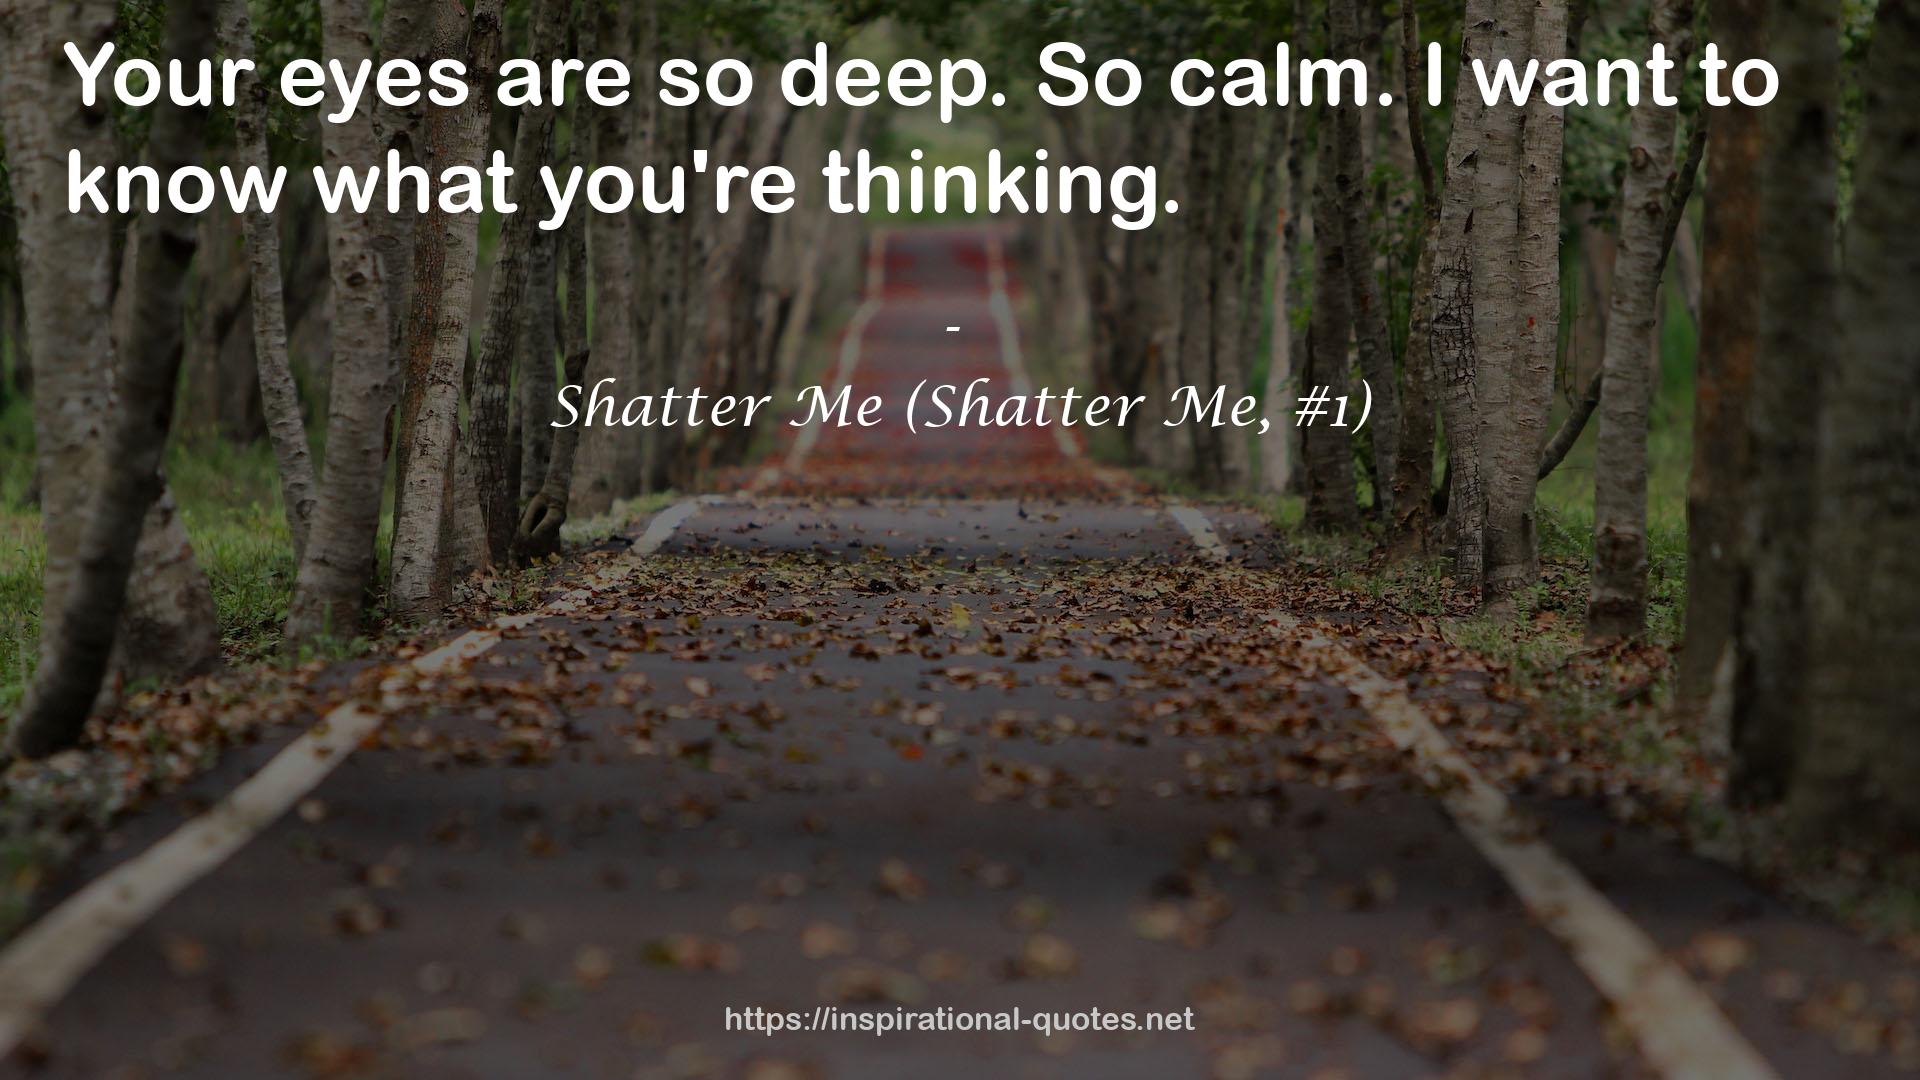 Shatter Me (Shatter Me, #1) QUOTES